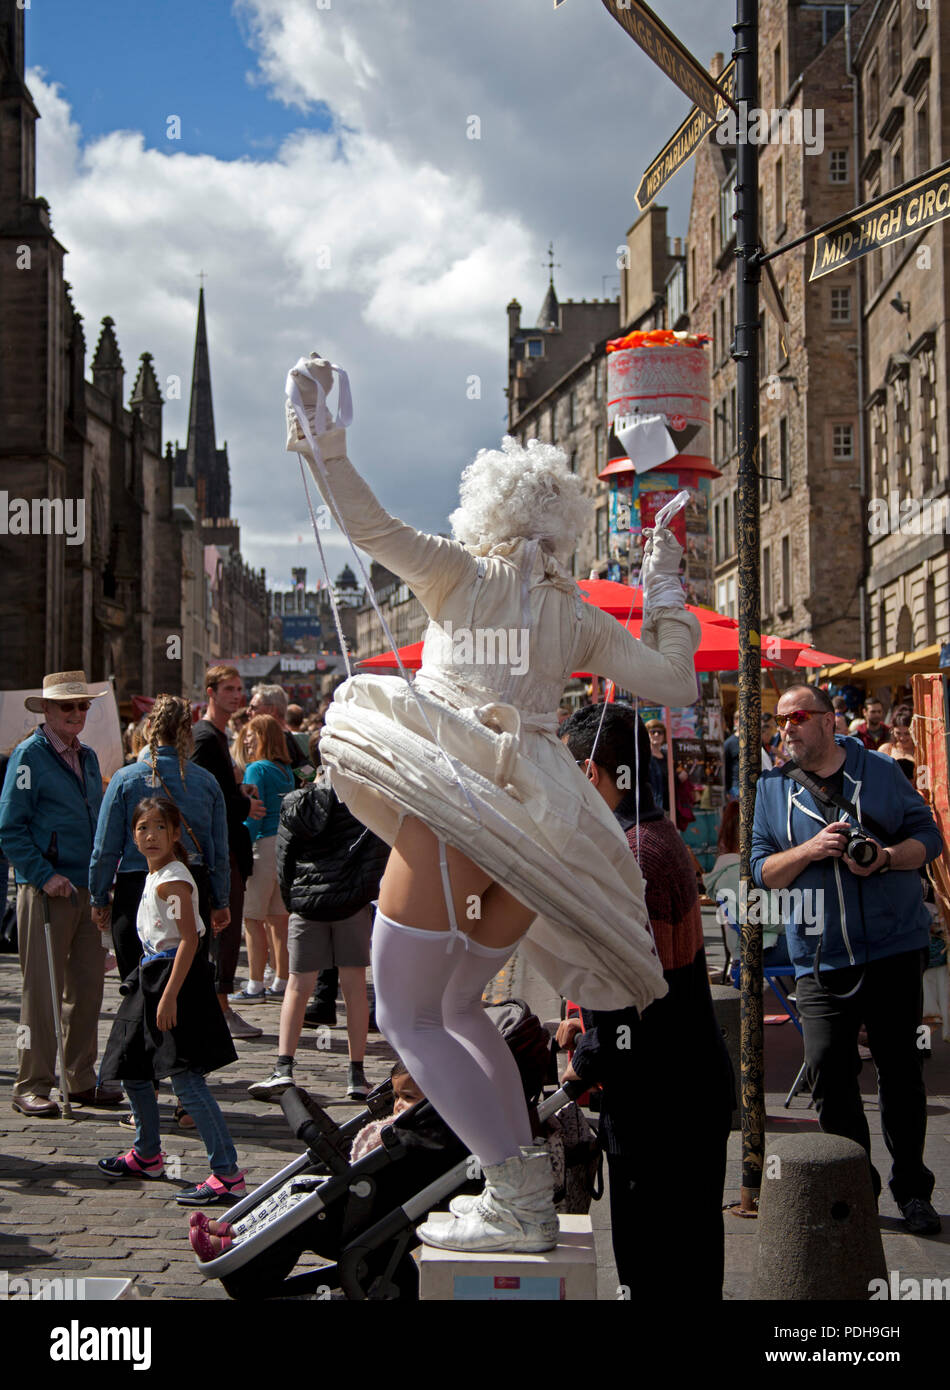 Edinburgh, Scotland, UK.9 August 2018. Sunny day at Edinburgh Festival Fringe in the Royal Mile and the Mound where some colourful characters entertained the audiences on the 6th day of the festival, Stock Photo